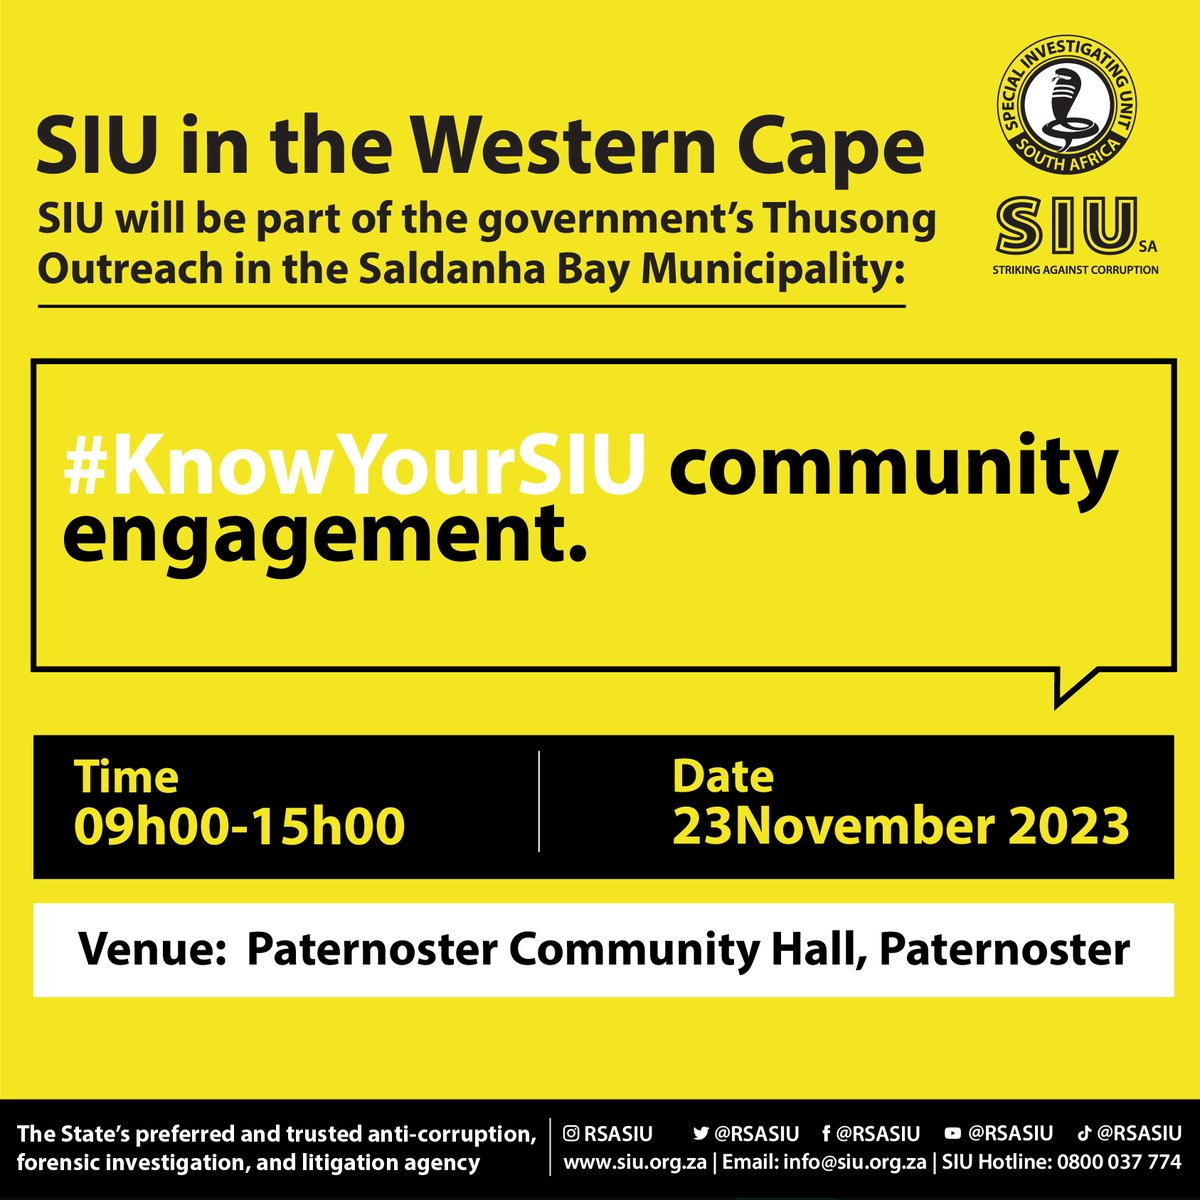 Tomorrow, the SIU will be part of the government’s Thusong Outreach in the Saldanha Bay Municipality, Western Cape. Members of the public are encouraged to come to our stall and get to #KnowYourSIU. Details are as follows: